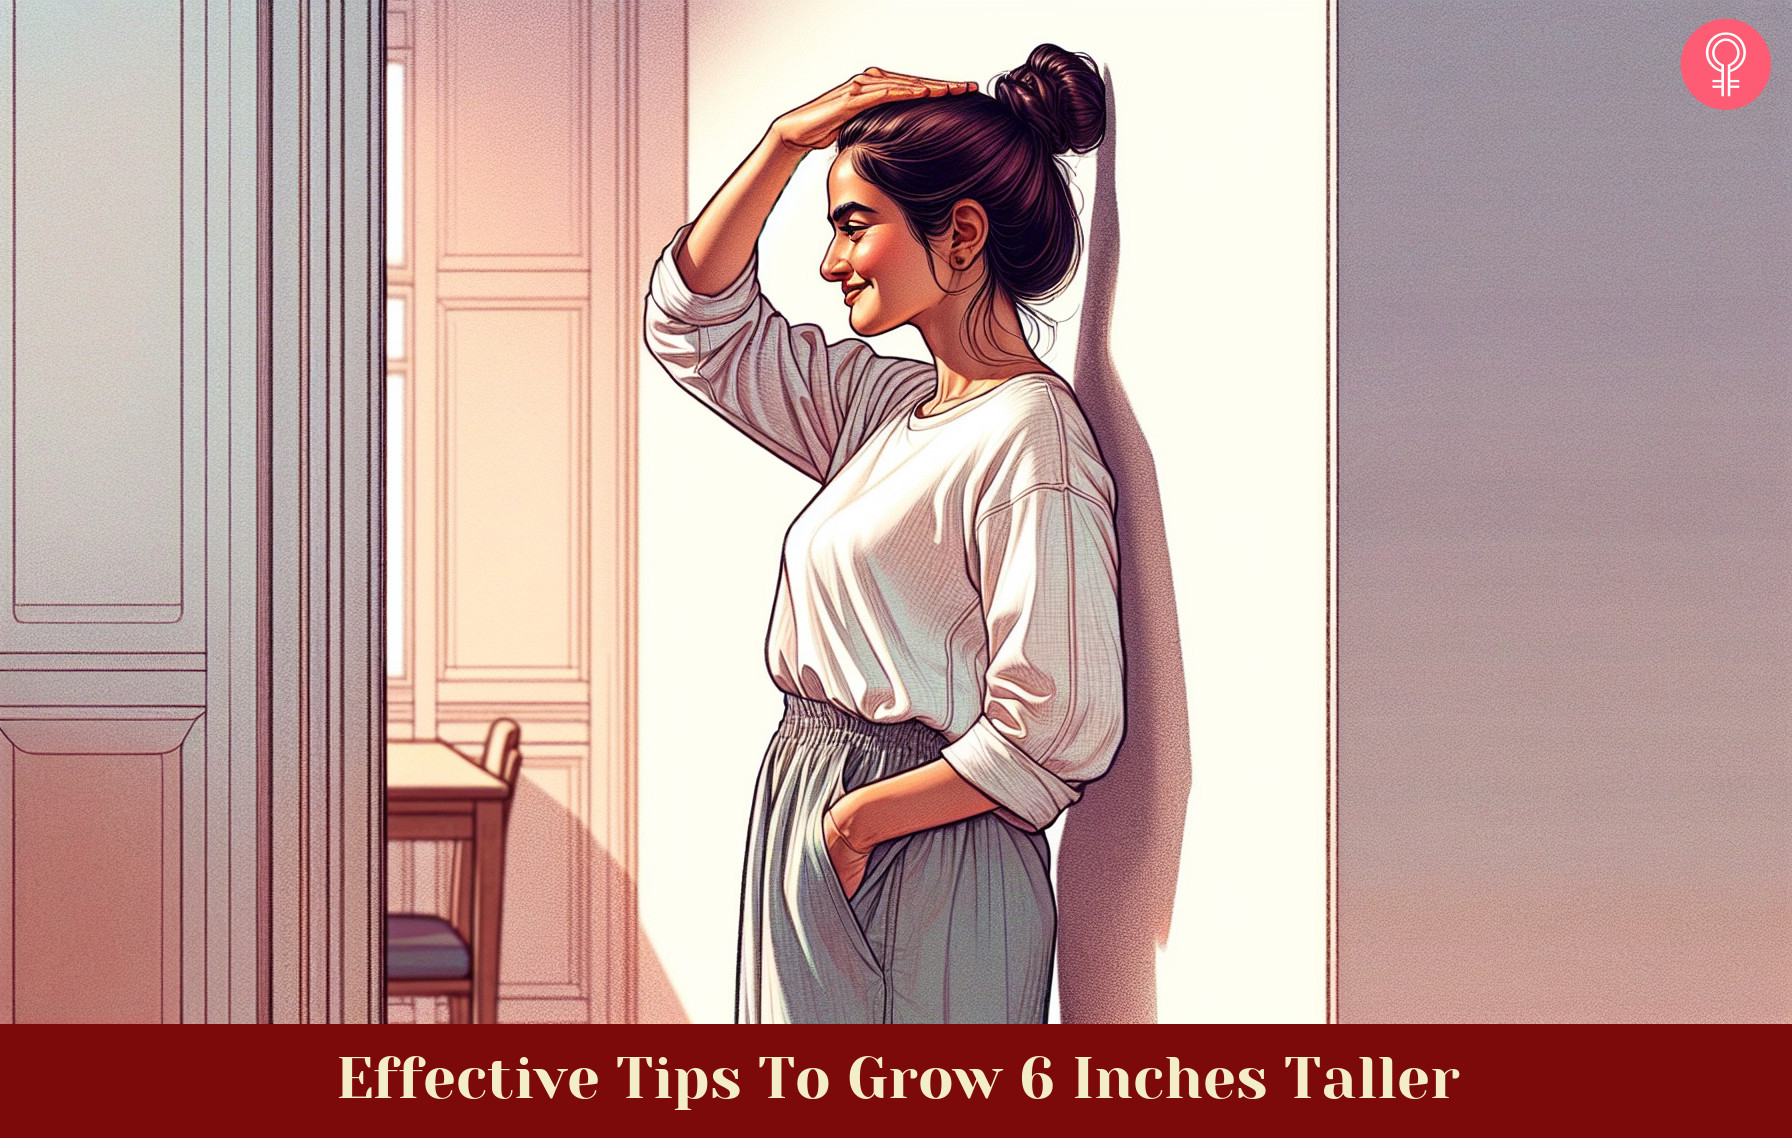 9 Effective Tips To Grow 6 Inches Taller